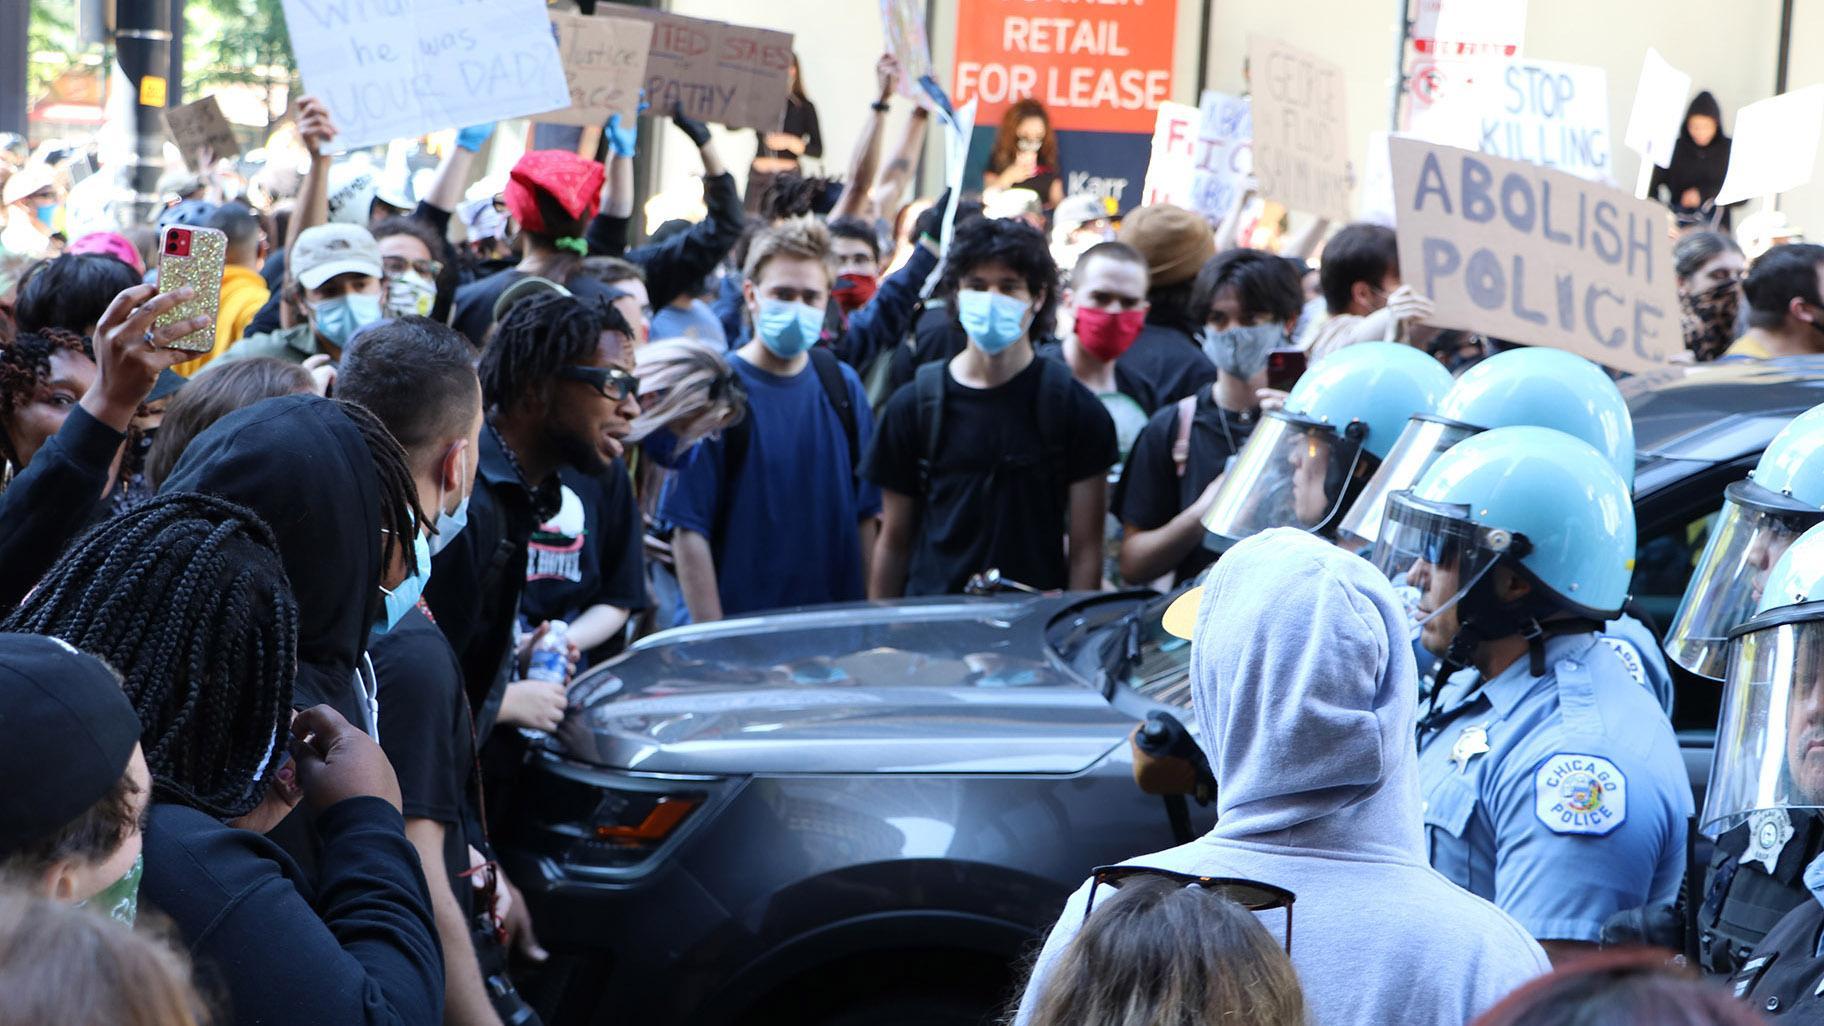 Protesters and police officers wearing riot gear have a standoff near Daley Plaza on Saturday, May 30, 2020. (Evan Garcia / WTTW News)